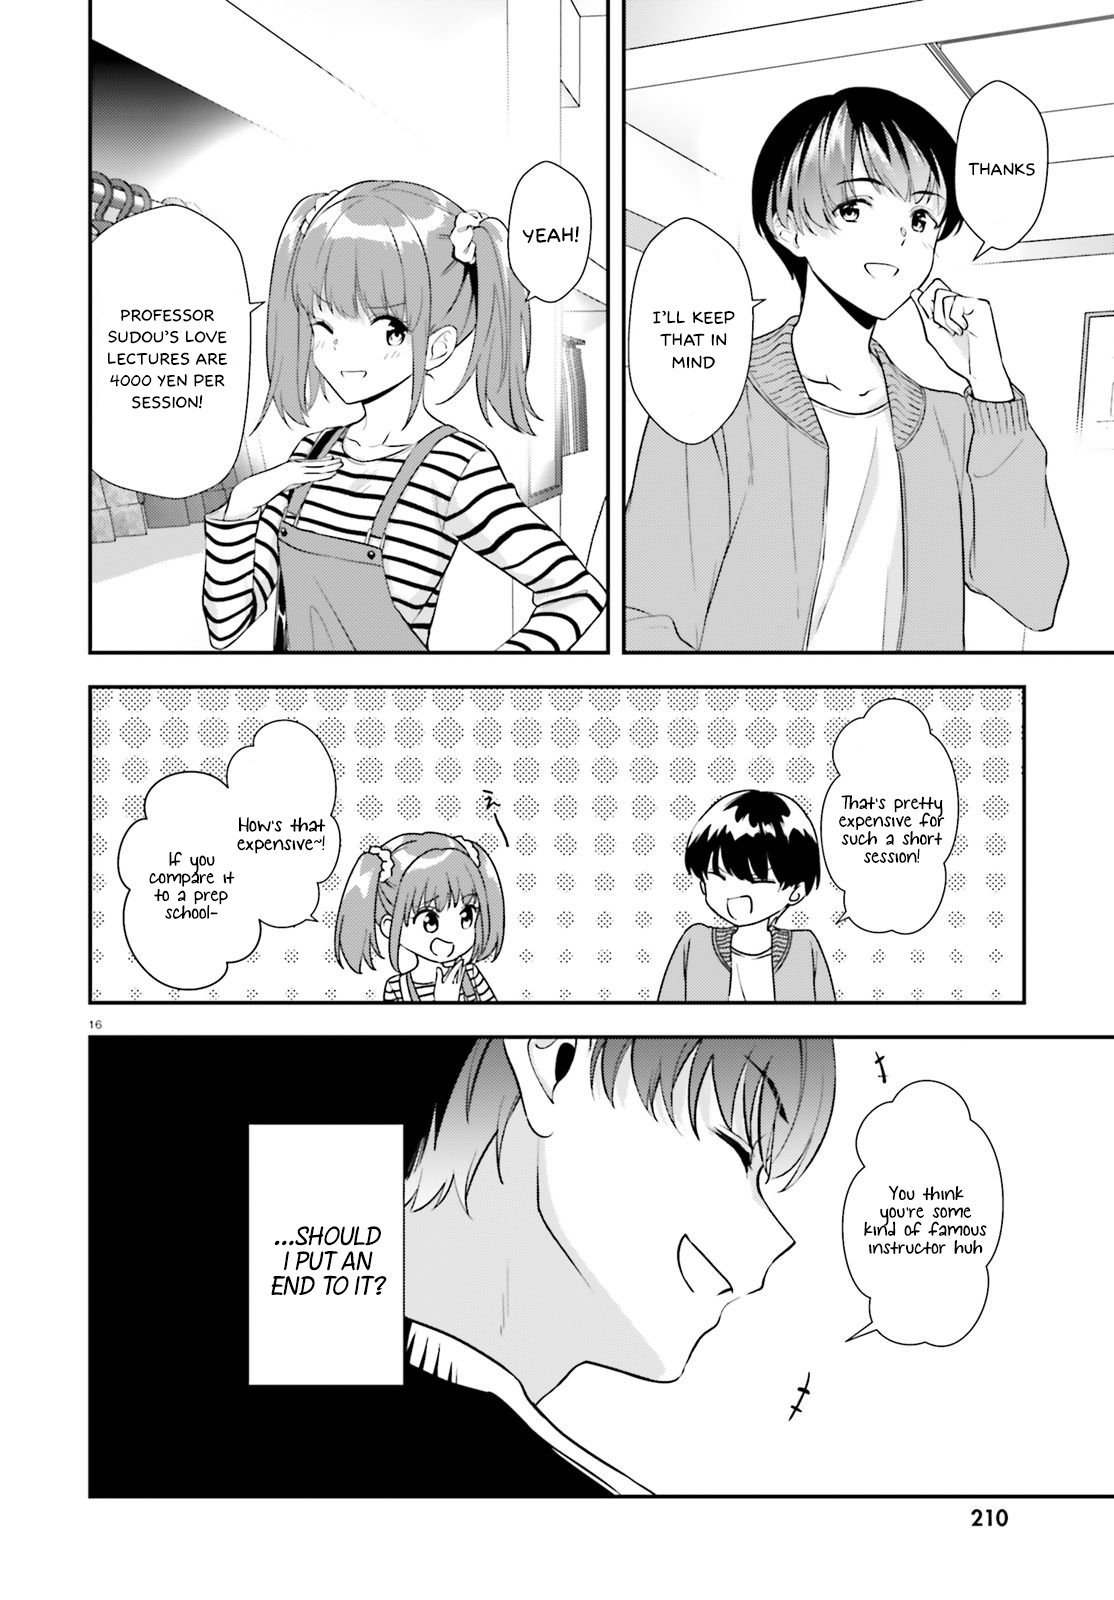 Bizarre Love Triangle Vol. 2 Ch. 10 The Weekend Together